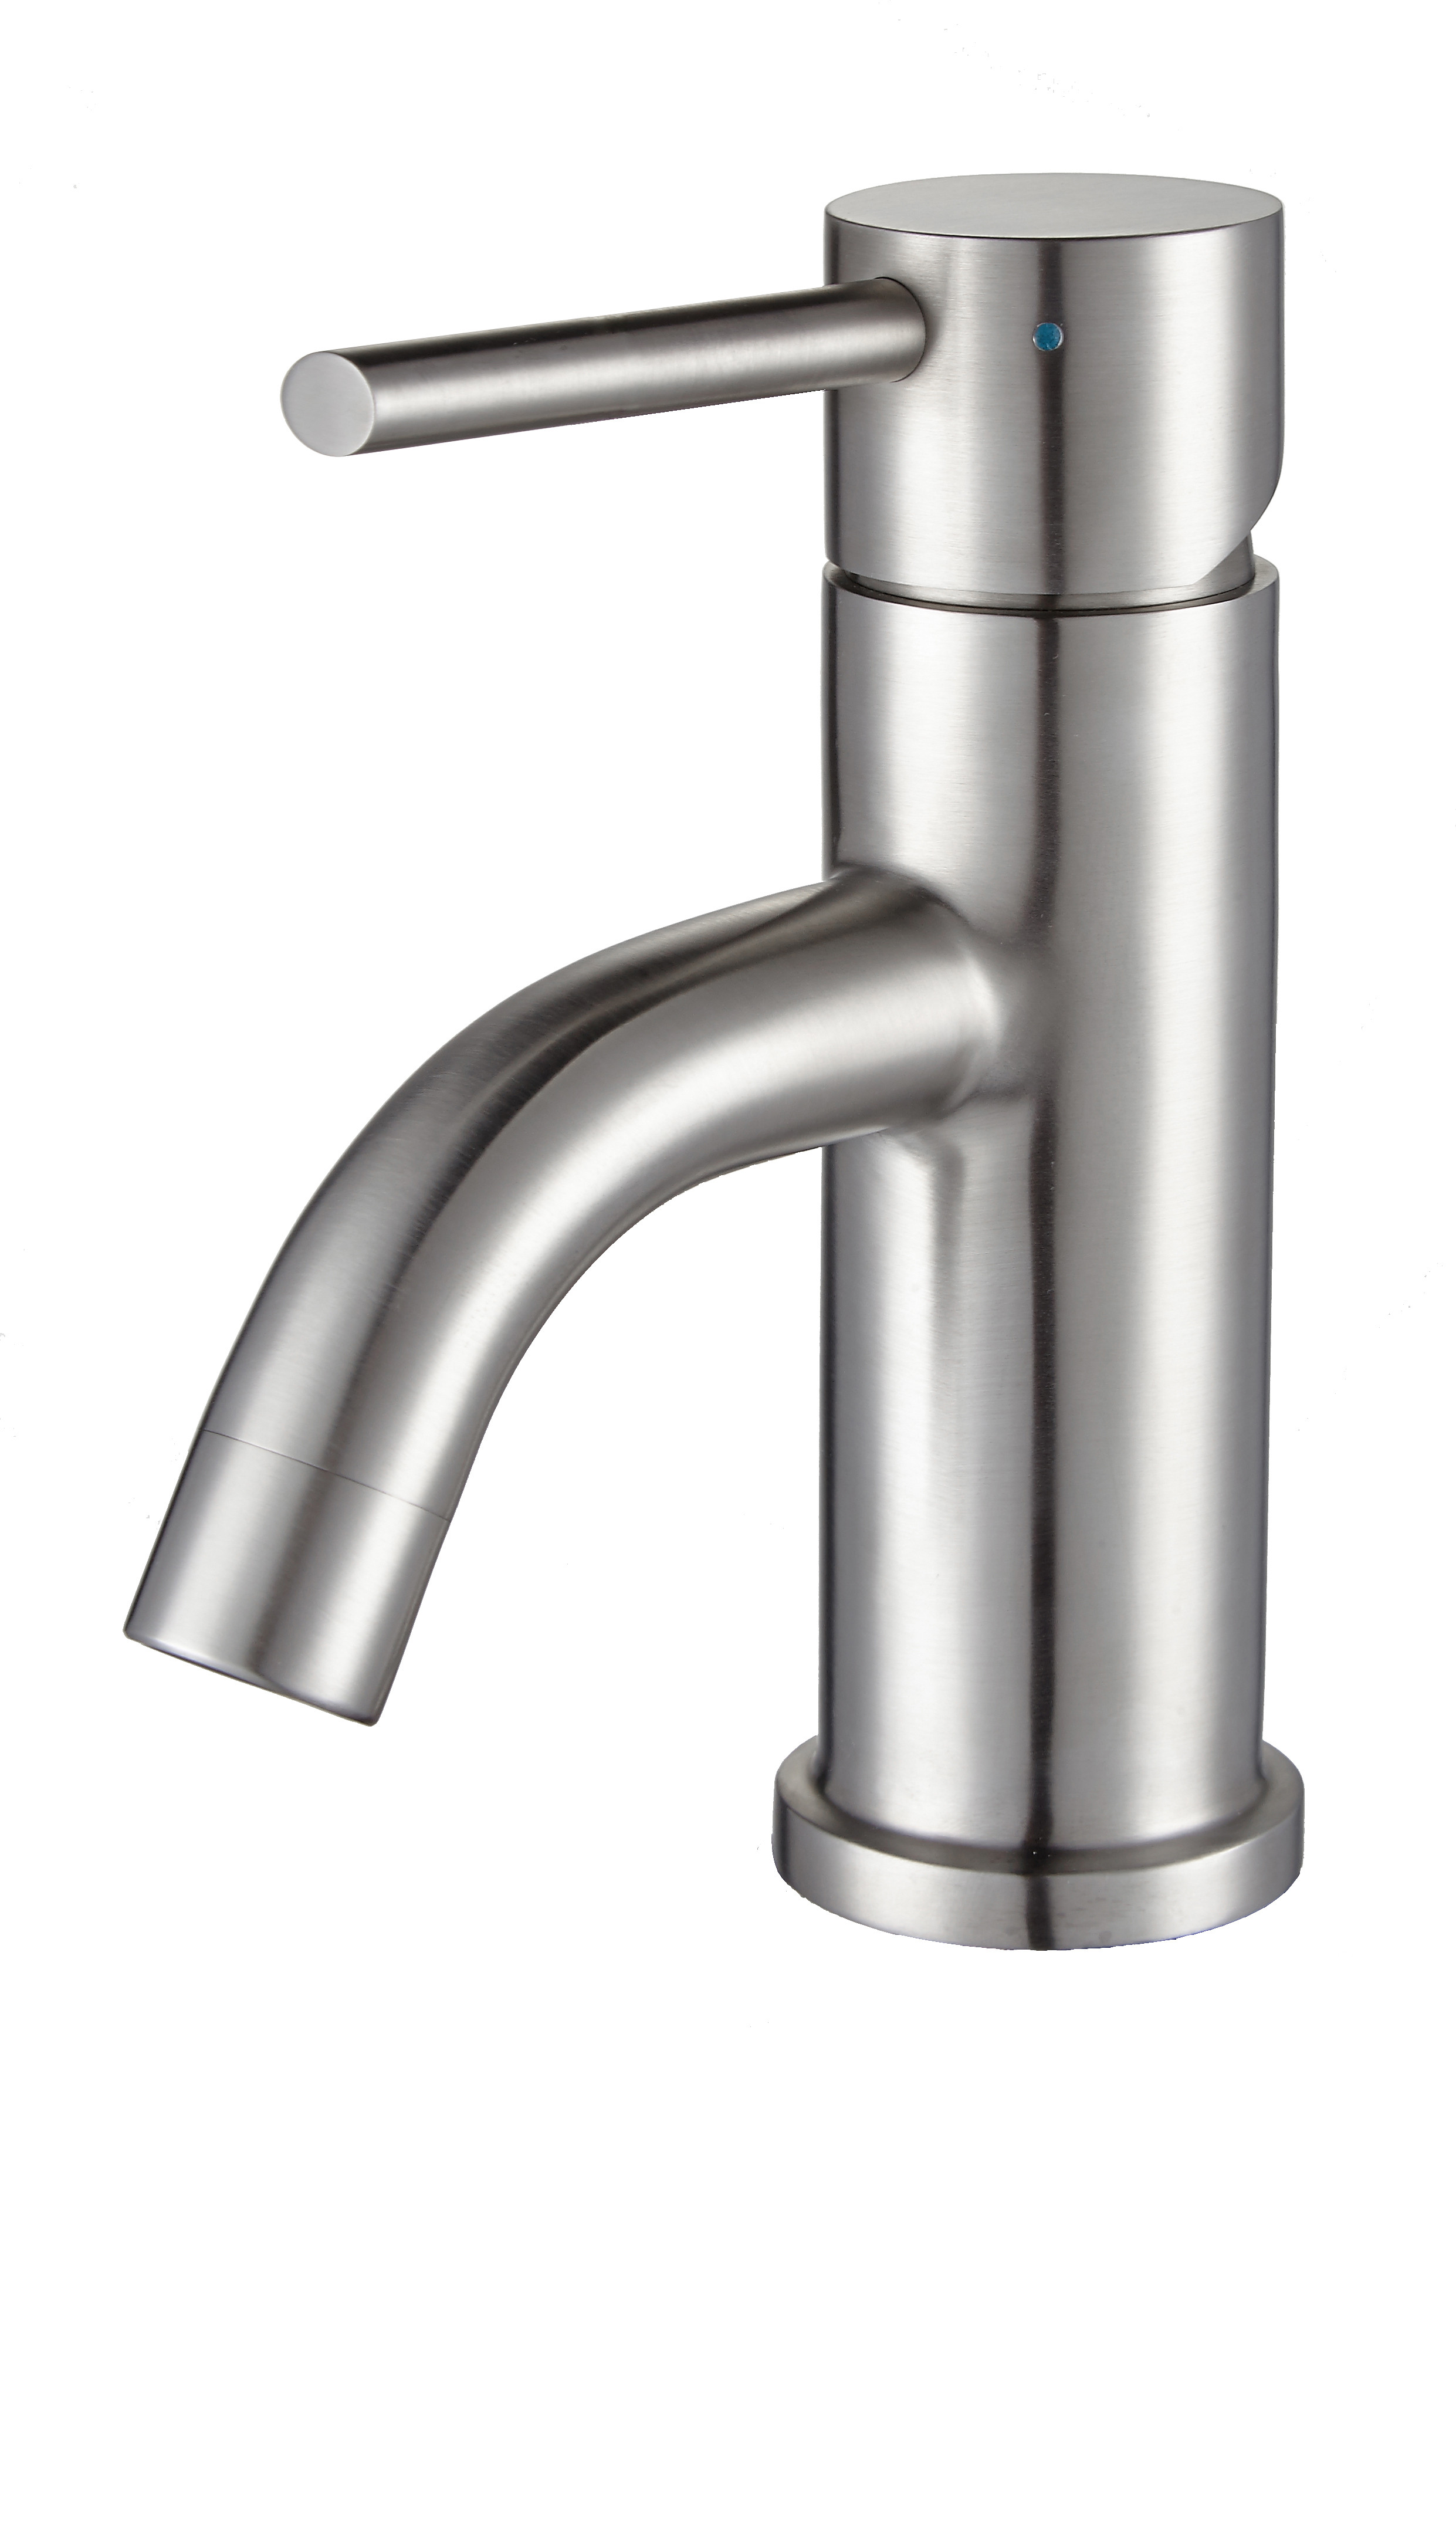 Whitehaus WHS0111-SB-BSS Brushed Stainless Steel 1 Handle Deck Mouted Standard Bathroom Faucet